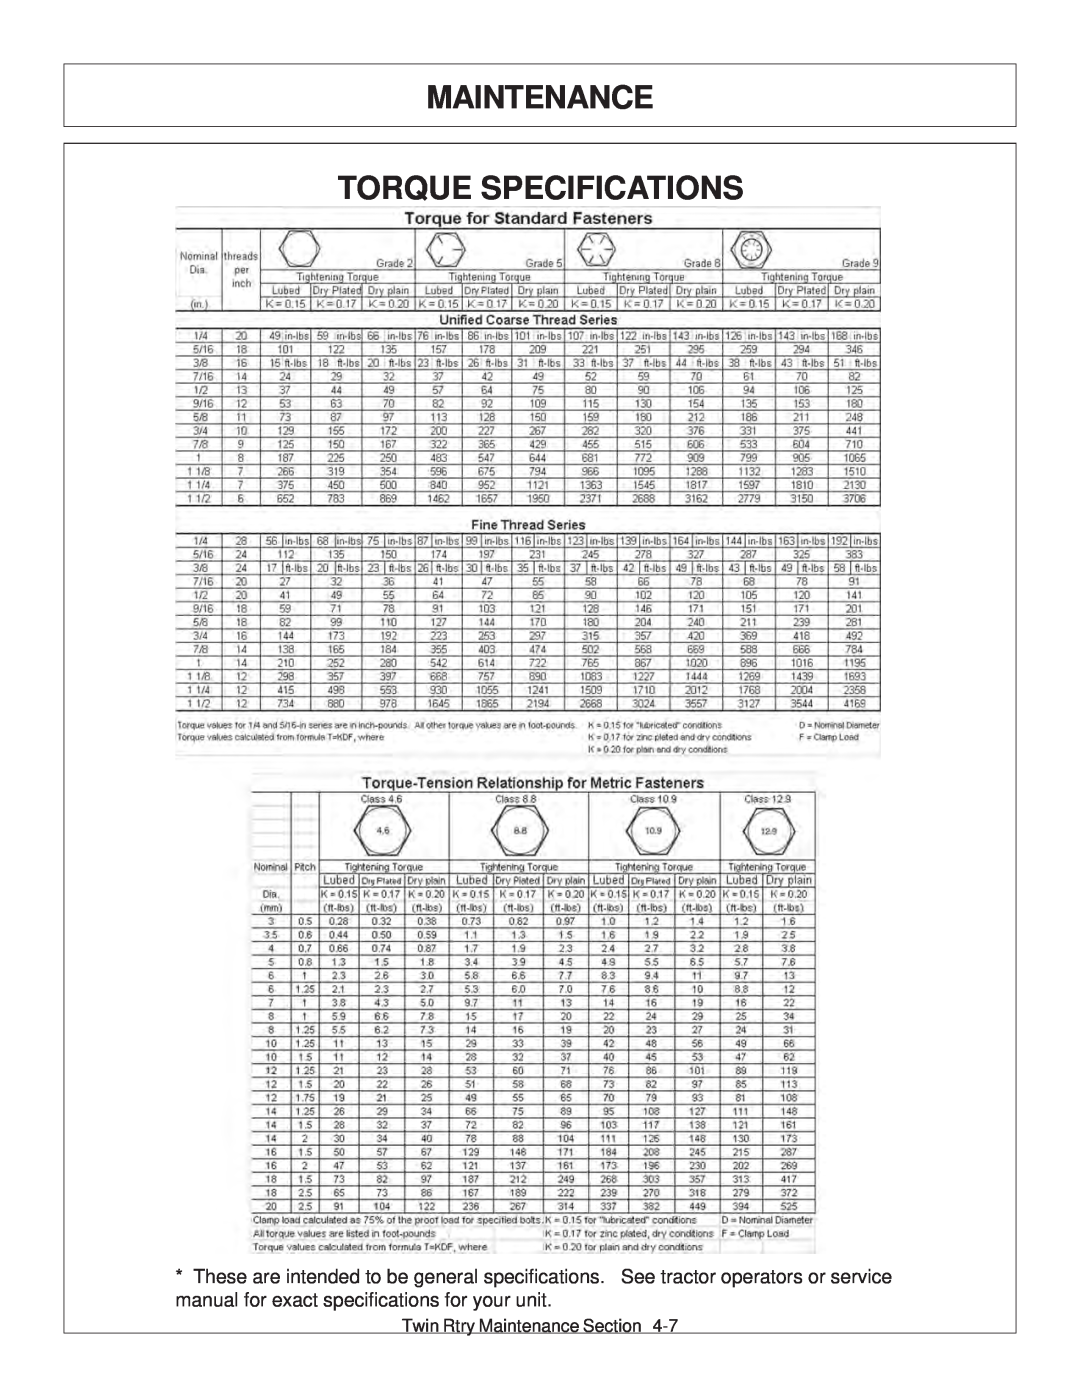 Tiger Products Co., Ltd 6020009 manual Maintenance Torque Specifications 